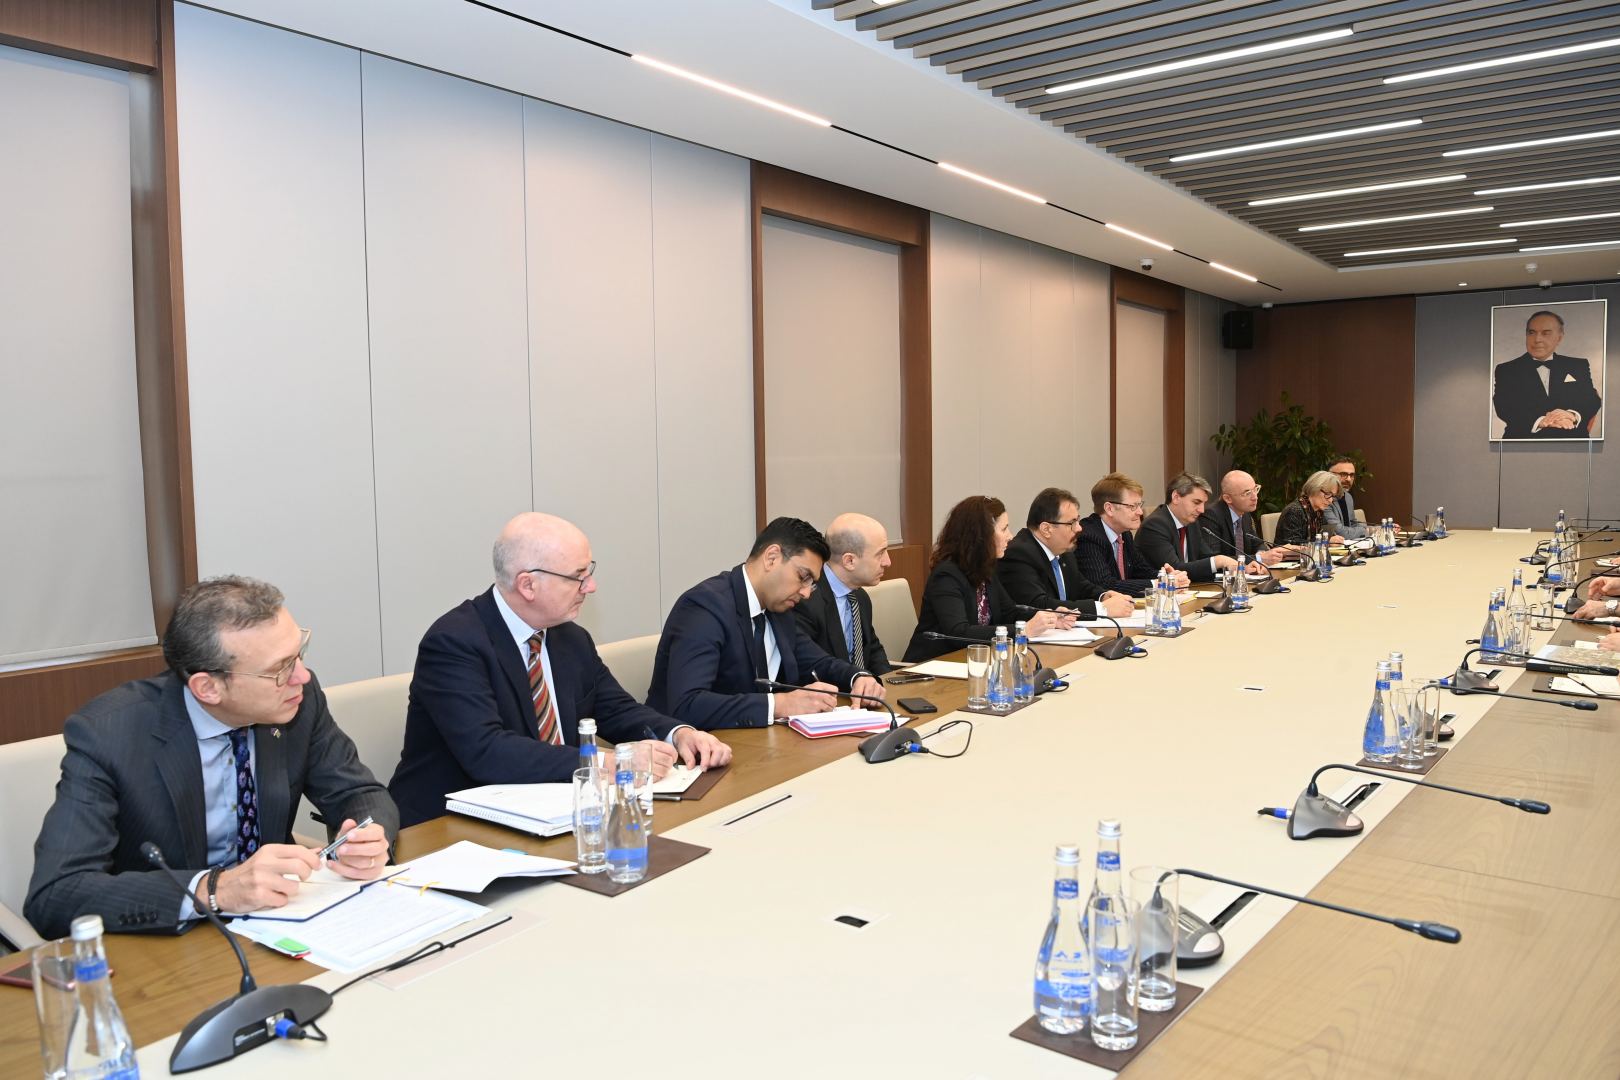 Azerbaijani FM meets with Director of Department of Eastern Neighborhood of European Commission (PHOTO)